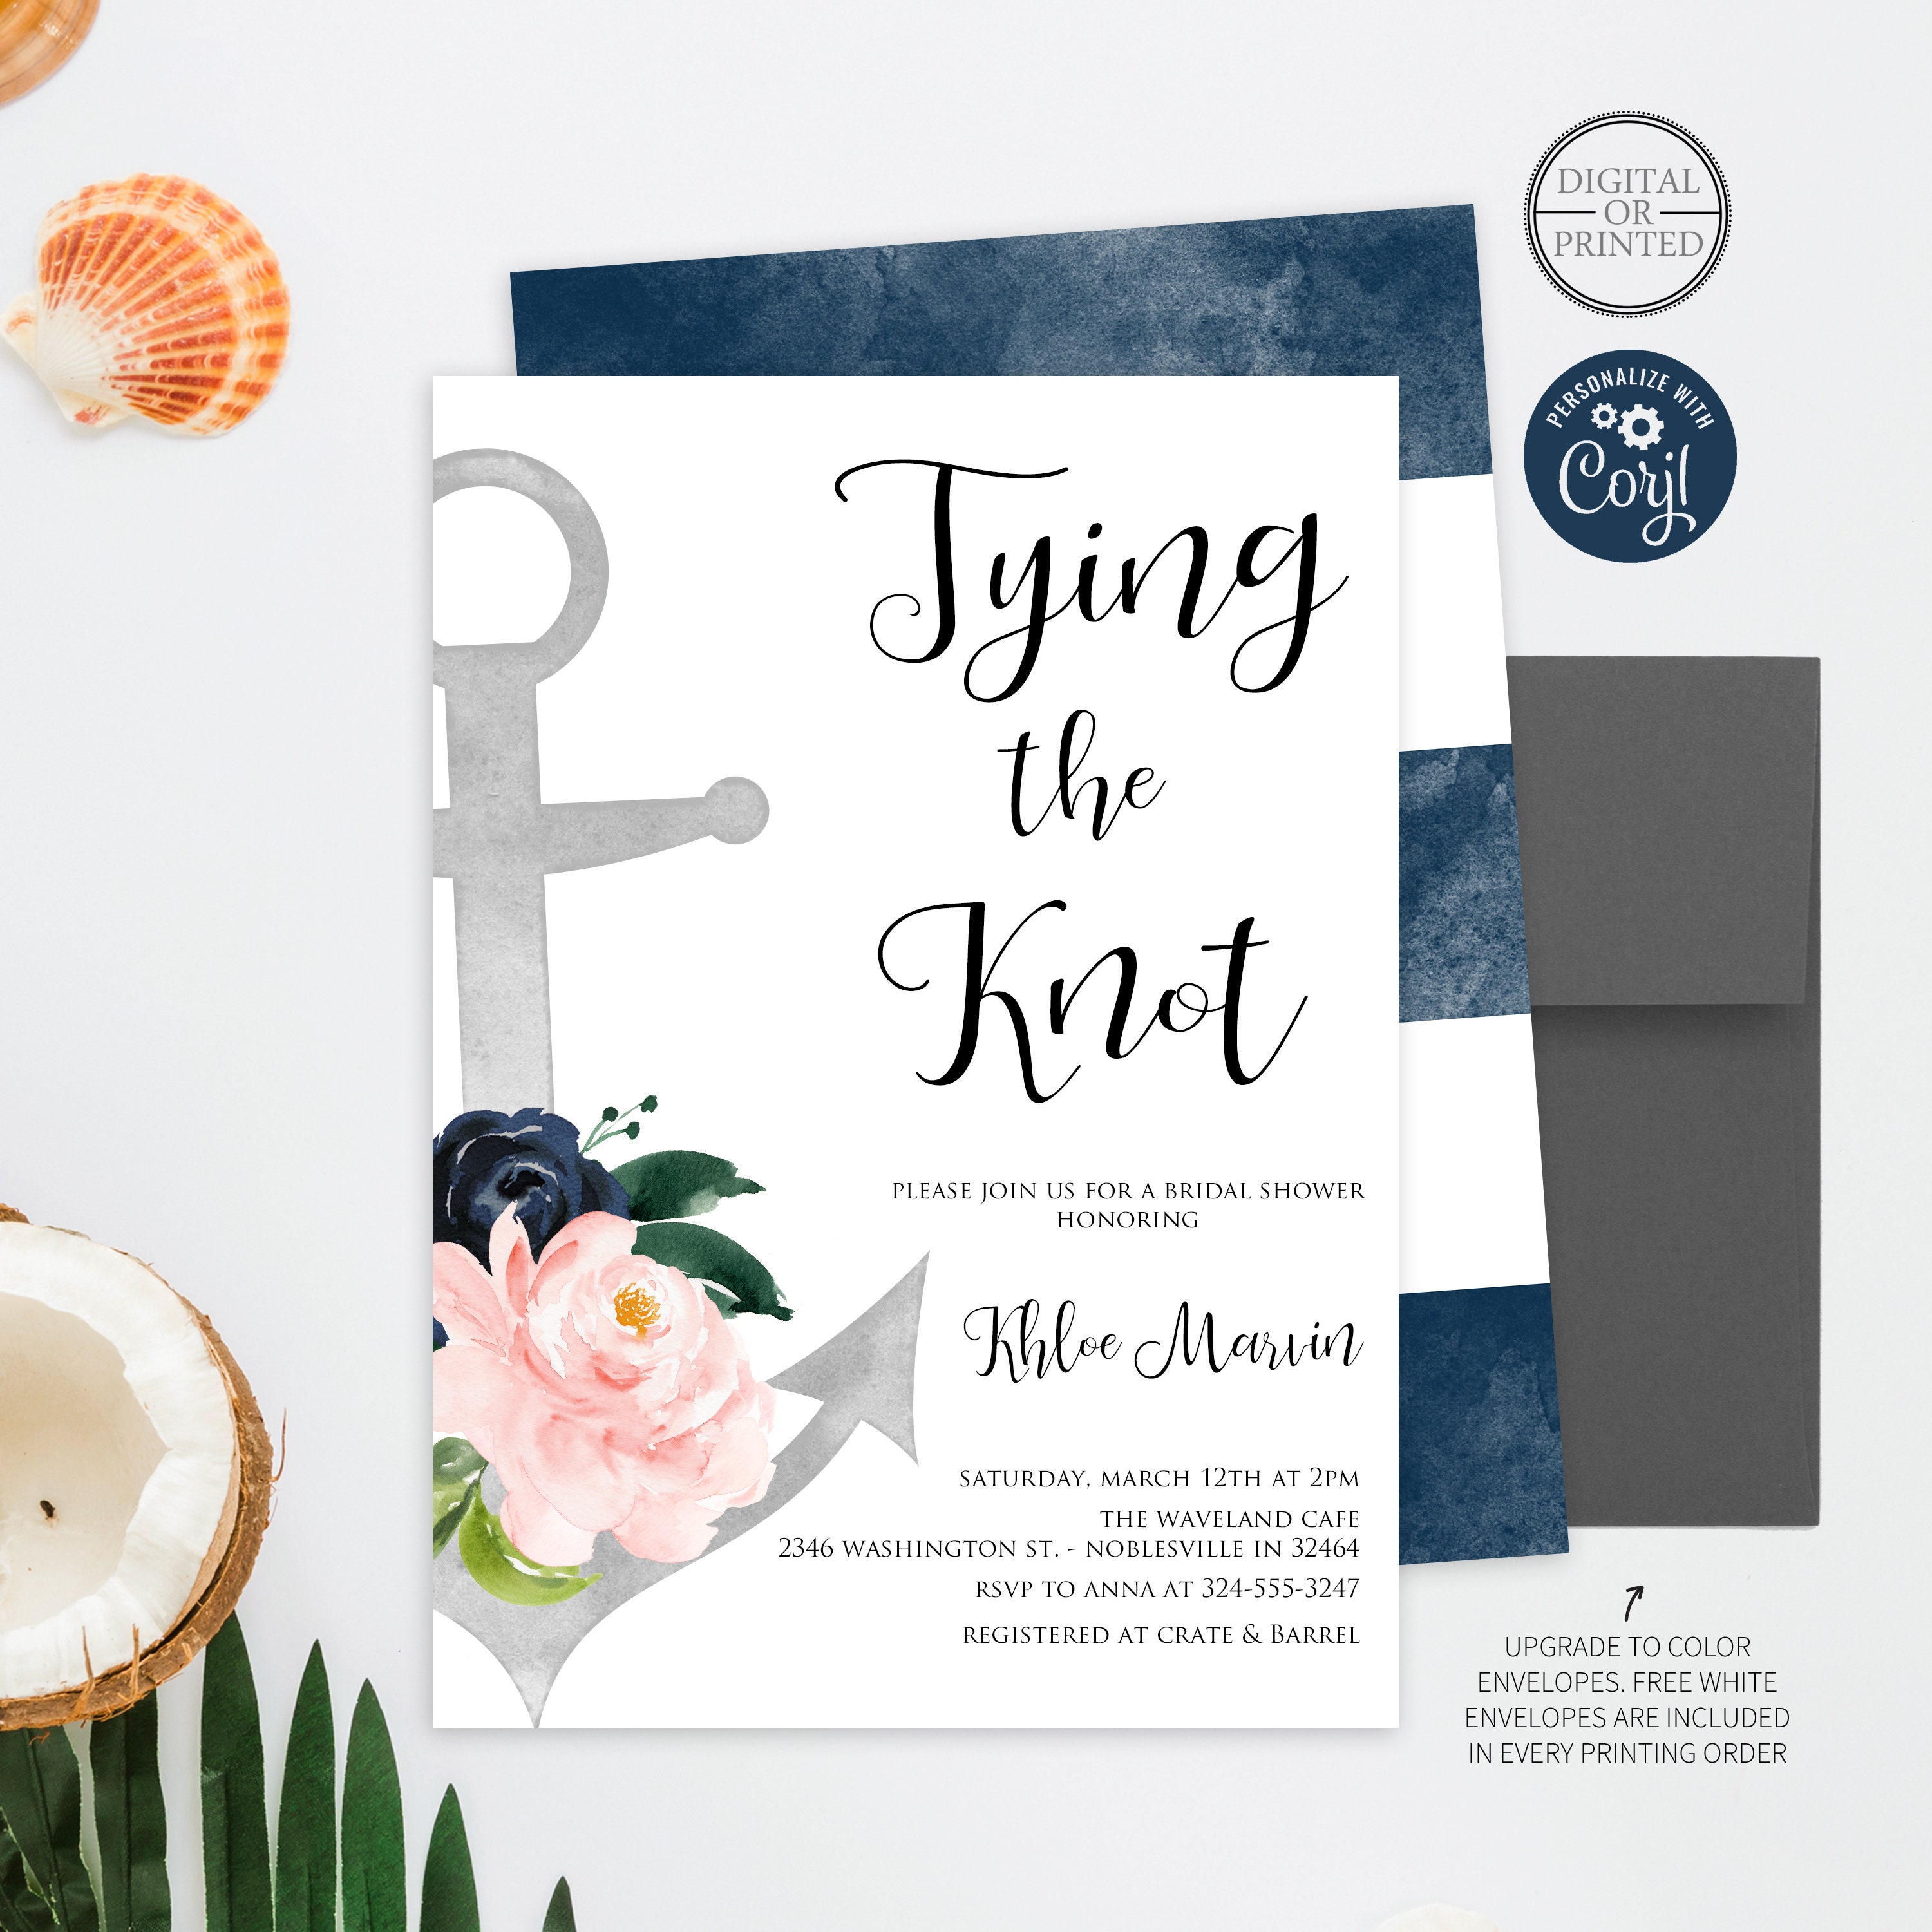 Blushing Bridal Shower Invitations with Envelopes (25 Pack) Blank  Invitation for Wedding Showers, Bride Luncheon, Bubbly – Navy Blue and Pink  Theme